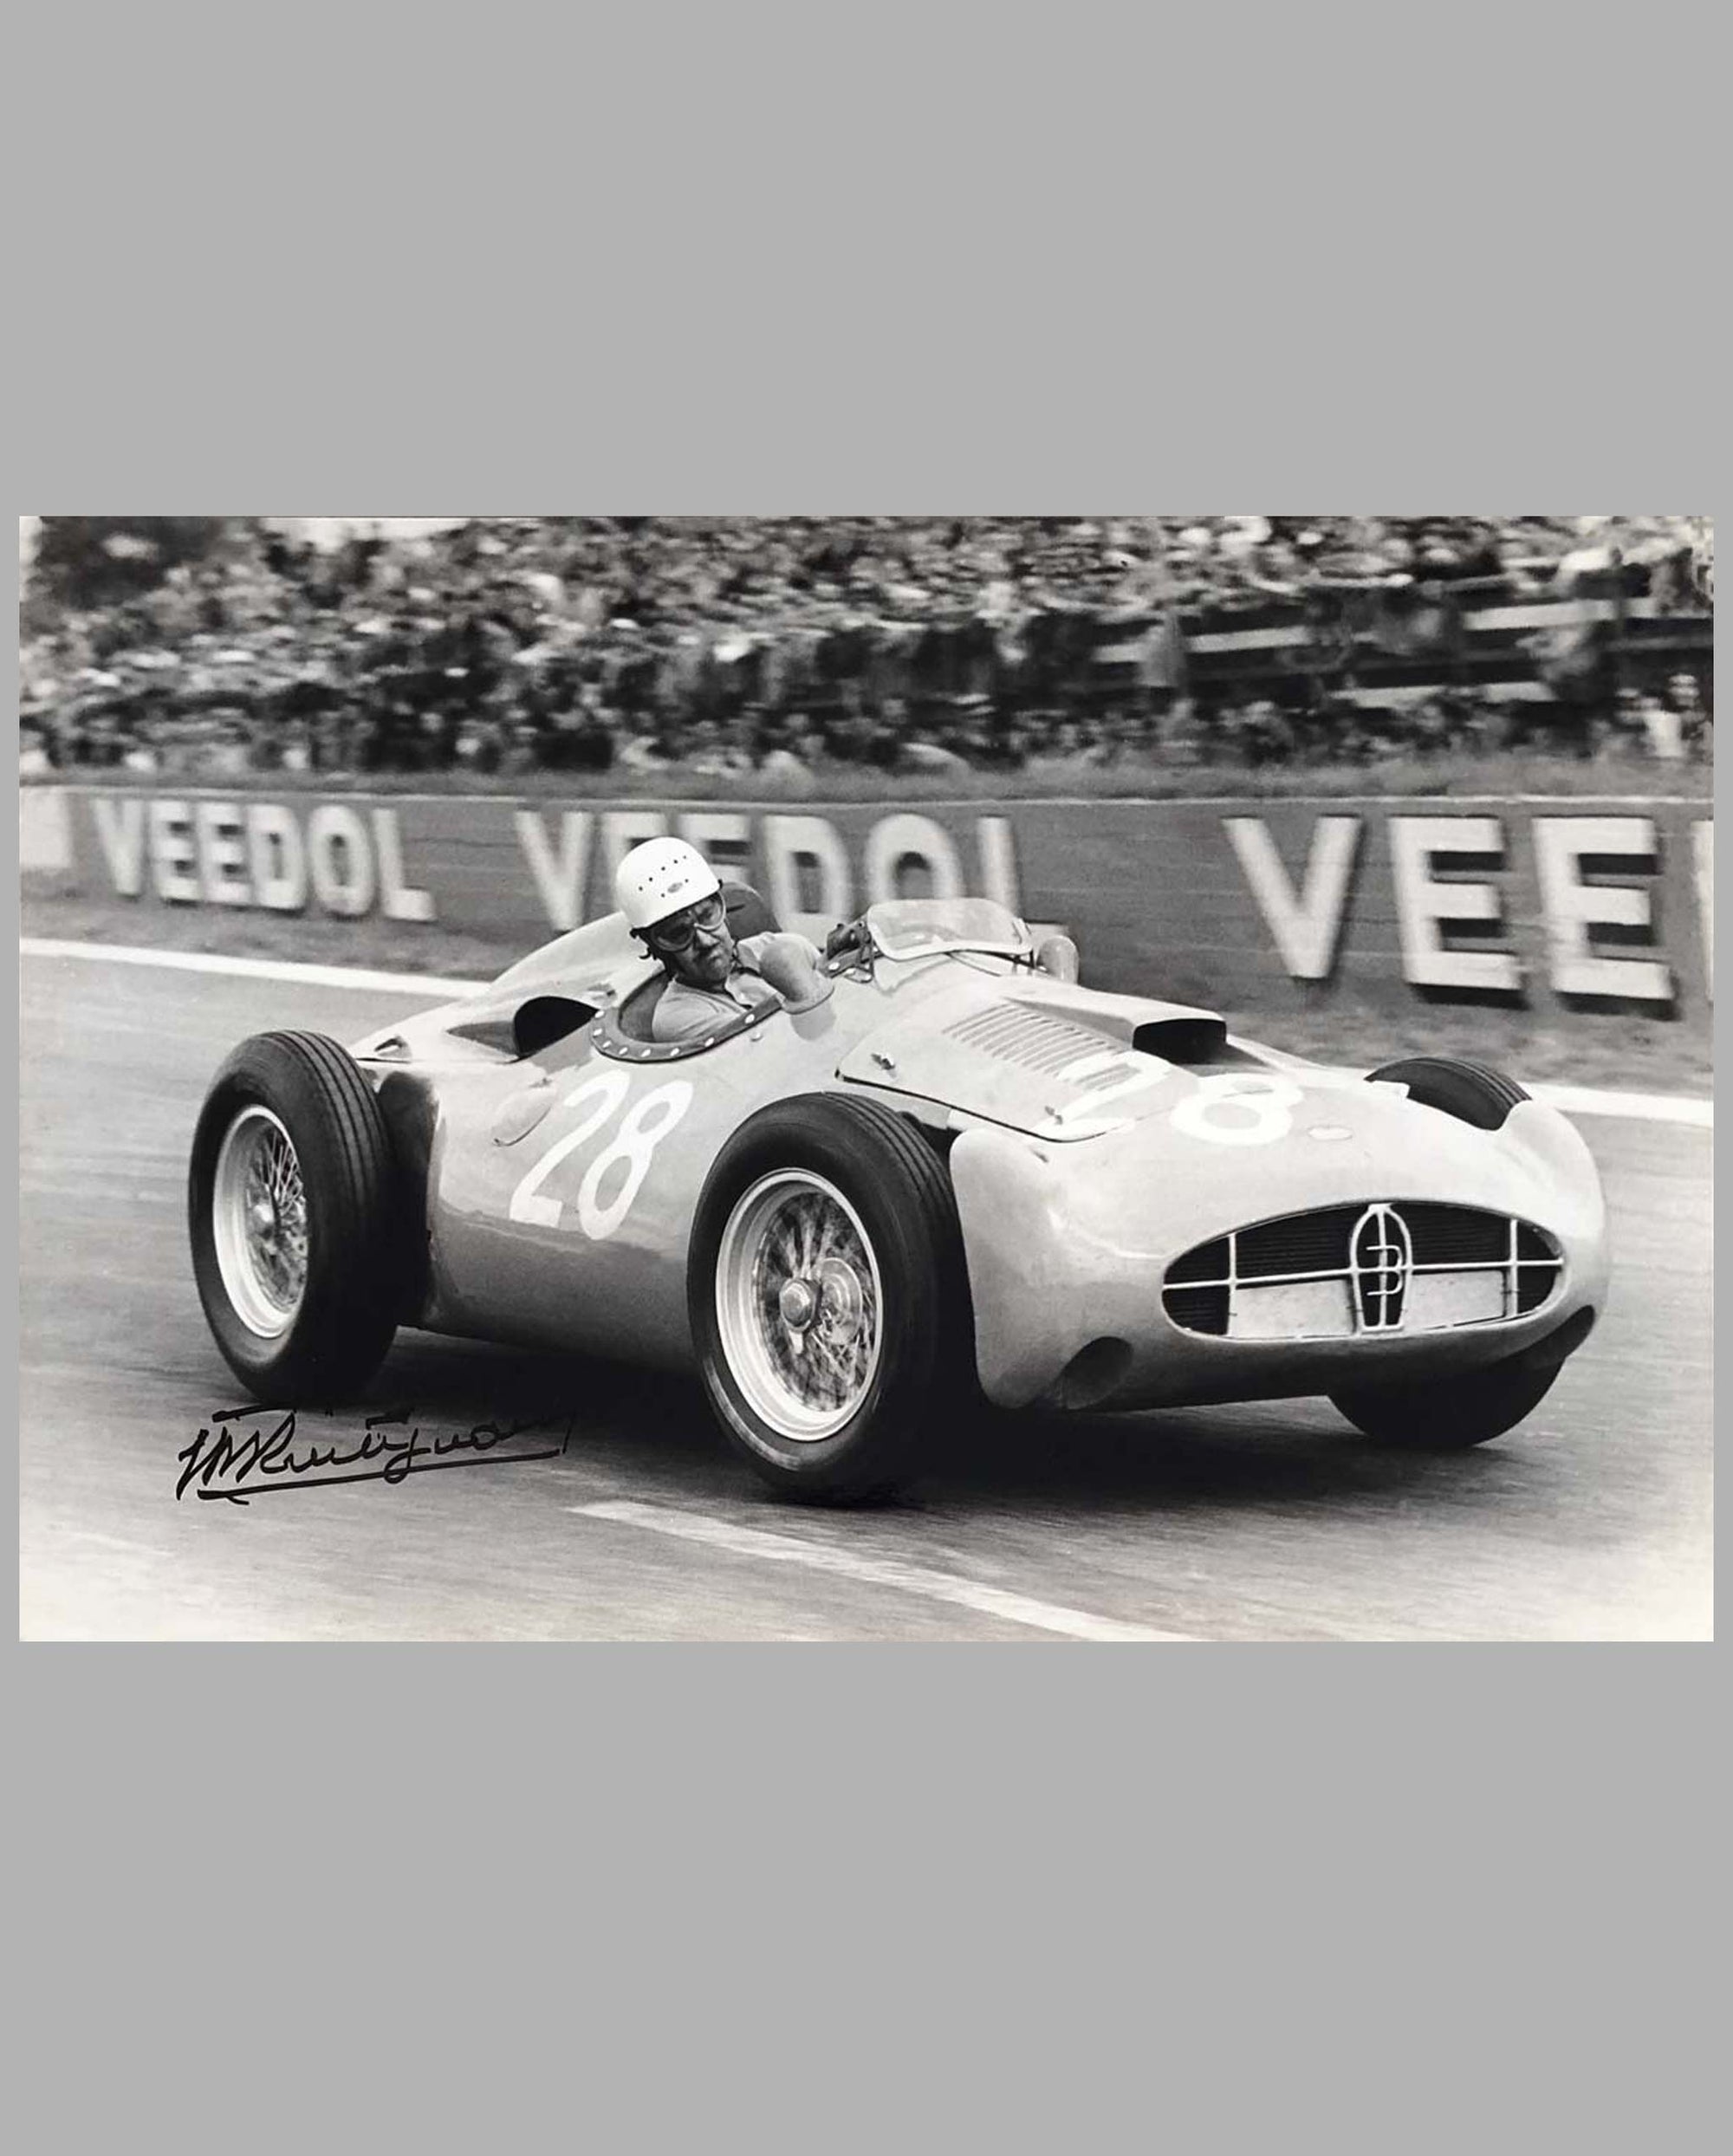 1956 Grand Prix Reims photograph by Bernard Cahier, autographed by Maurice Trintignant